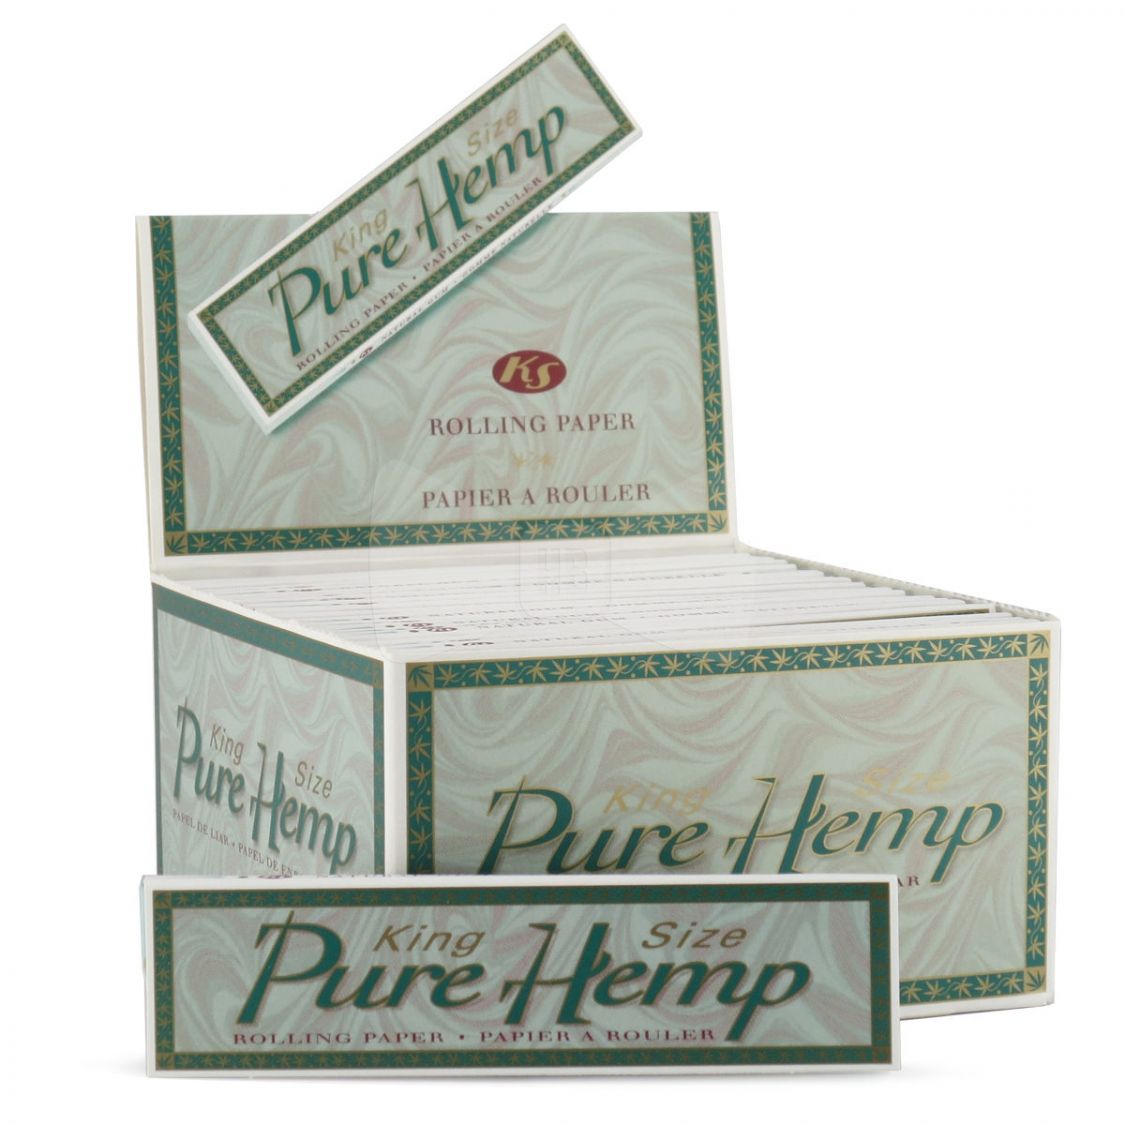 Pure Hemp Pure Hemp King Size  Papers Accessories Paper / Rolling Supplies